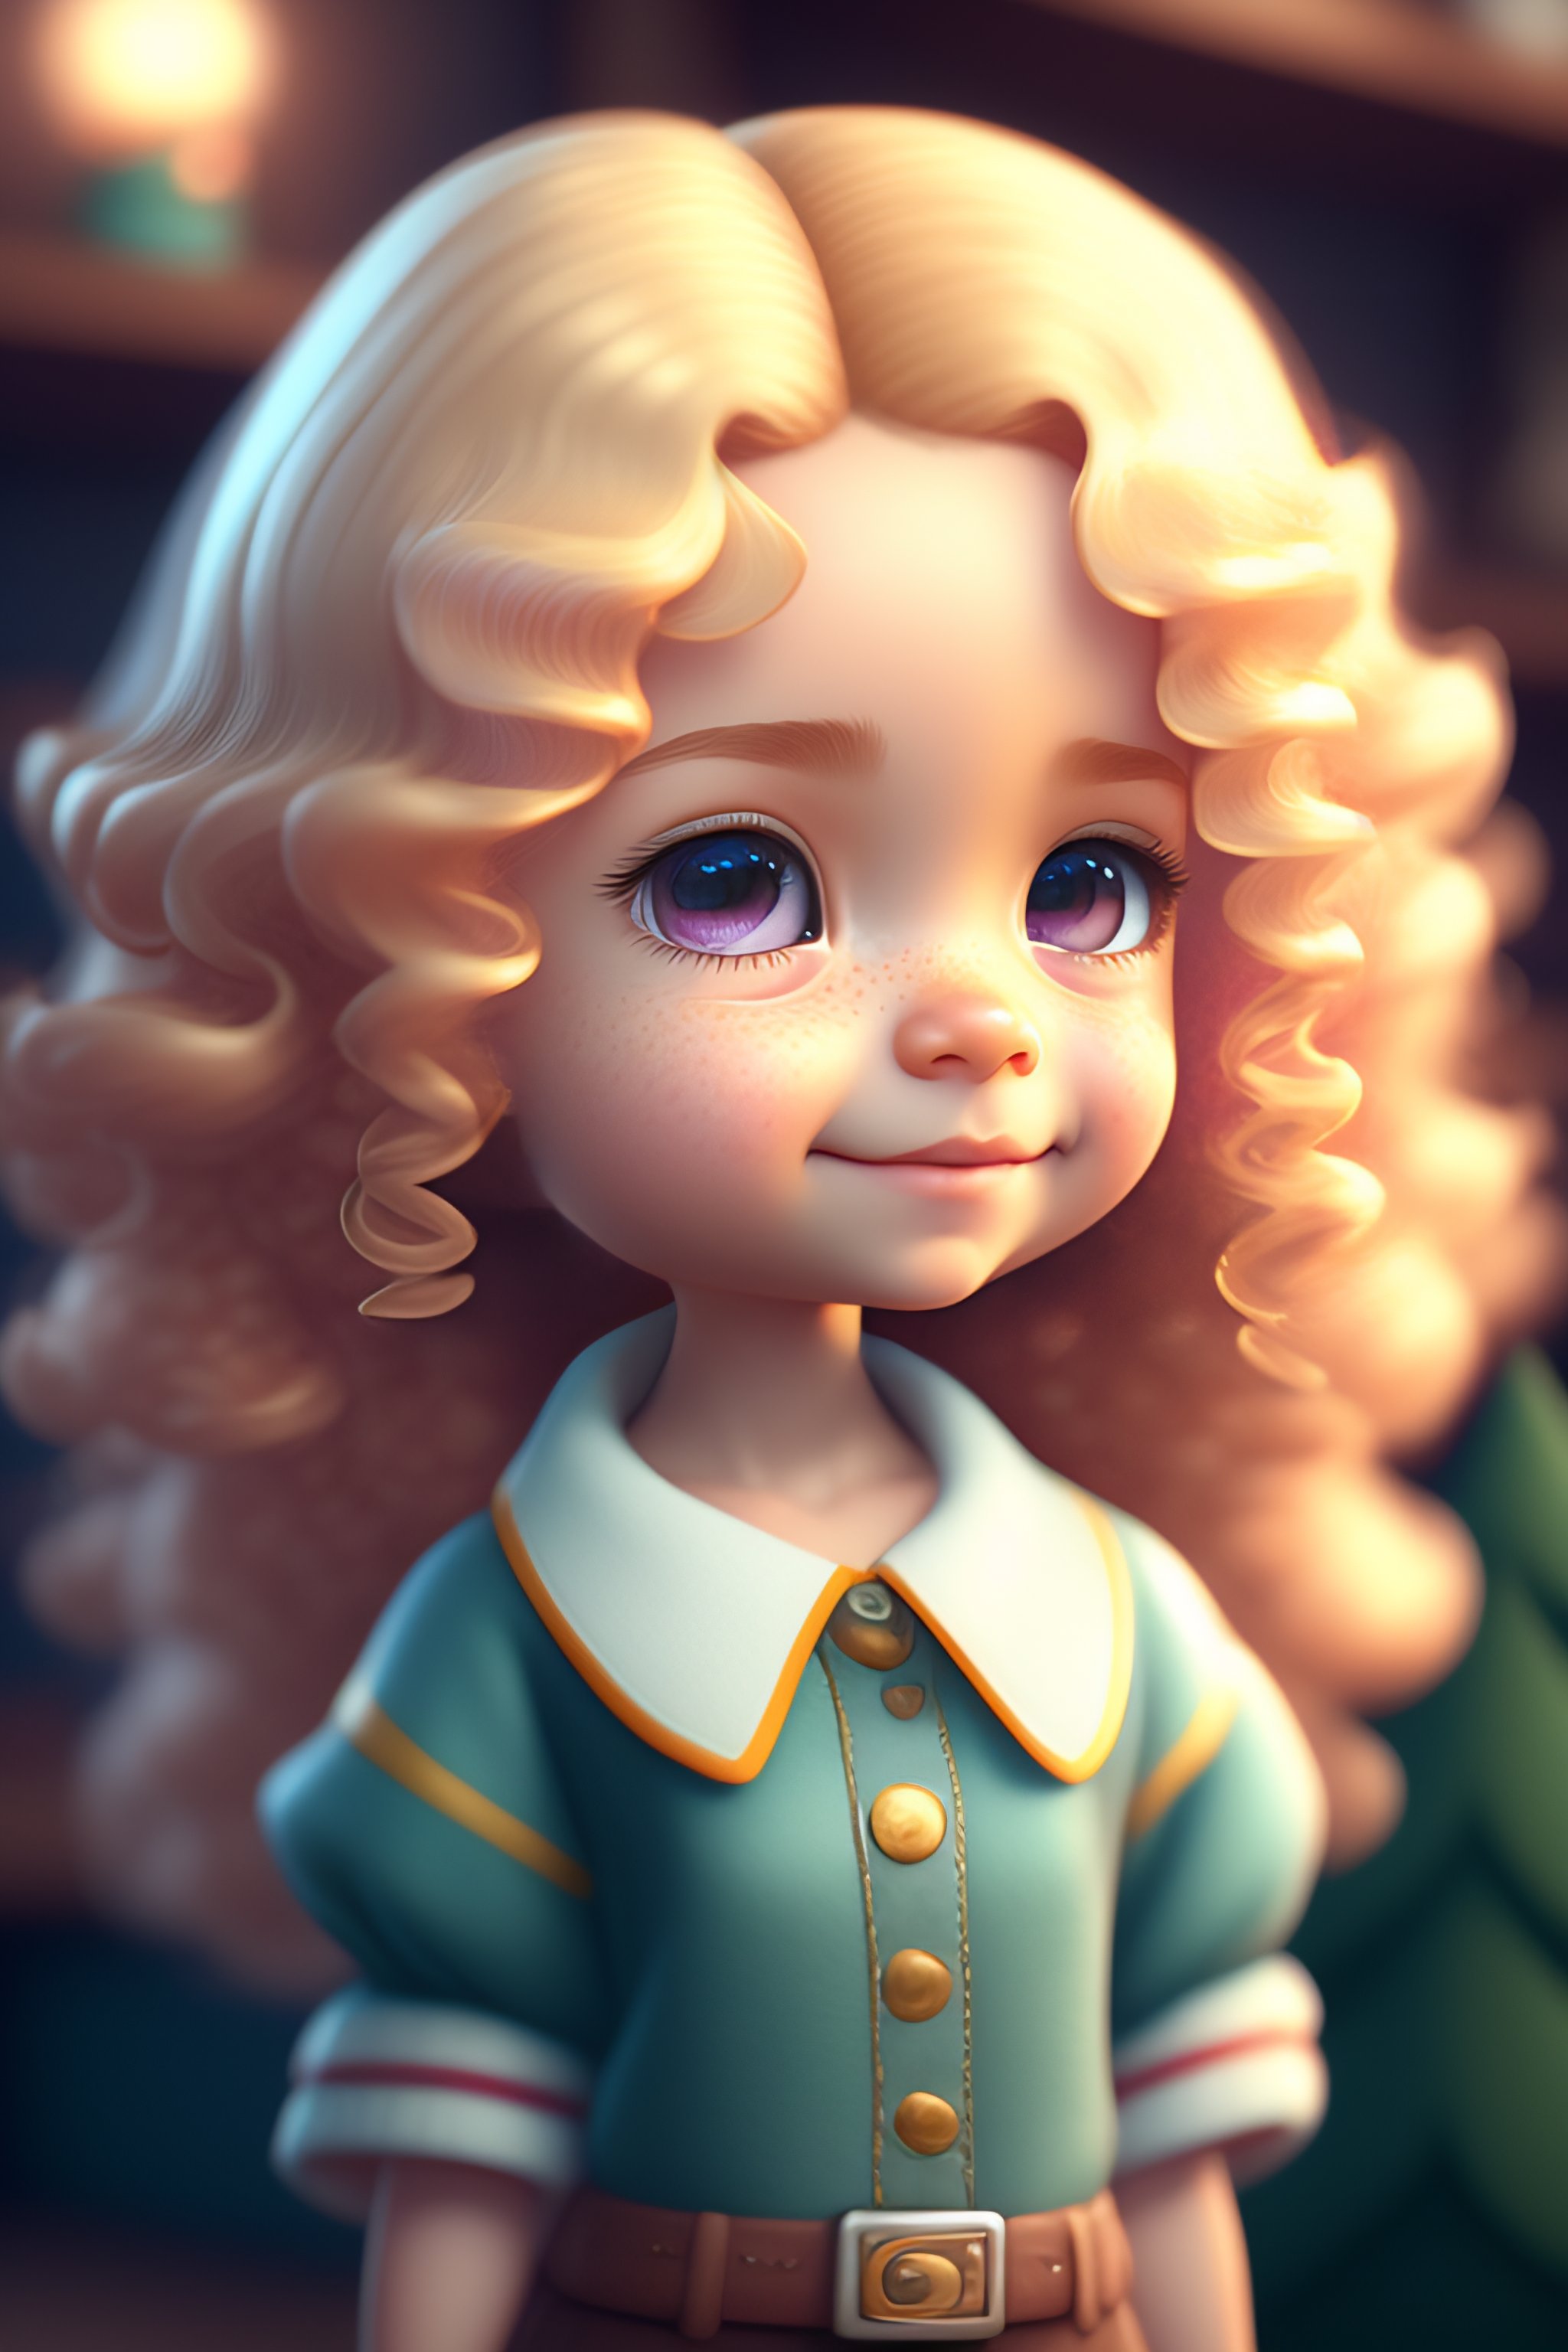 cartoon girl with blonde curly hair